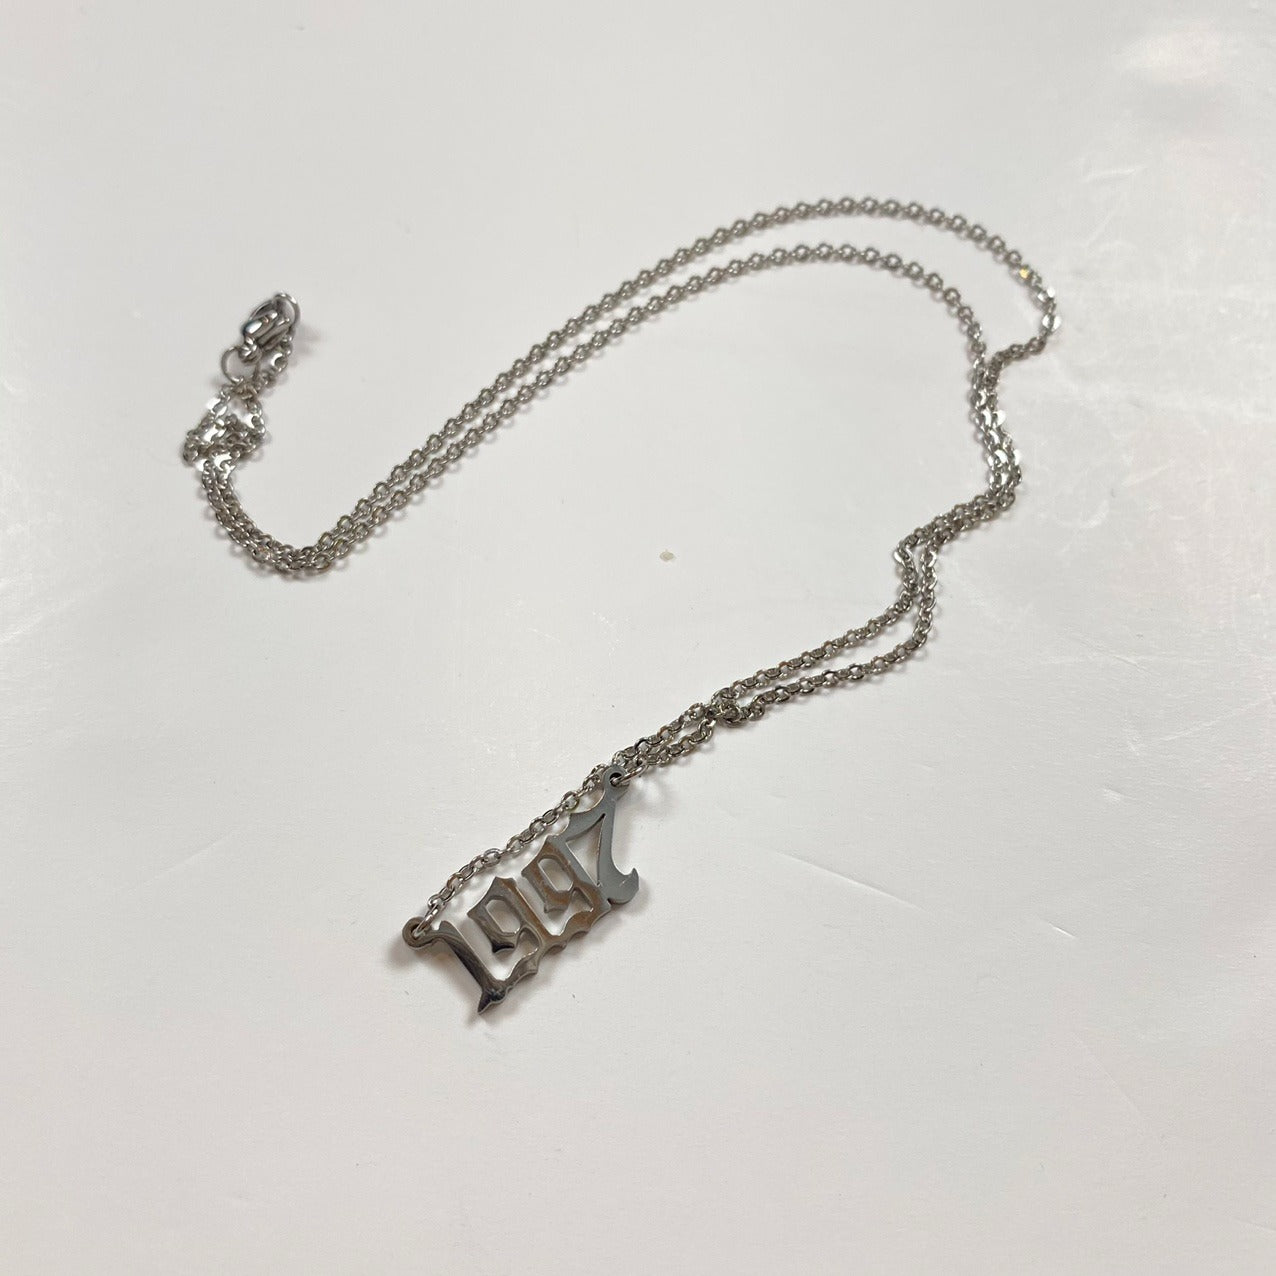 1997 Birth Year Necklace Chain Silver